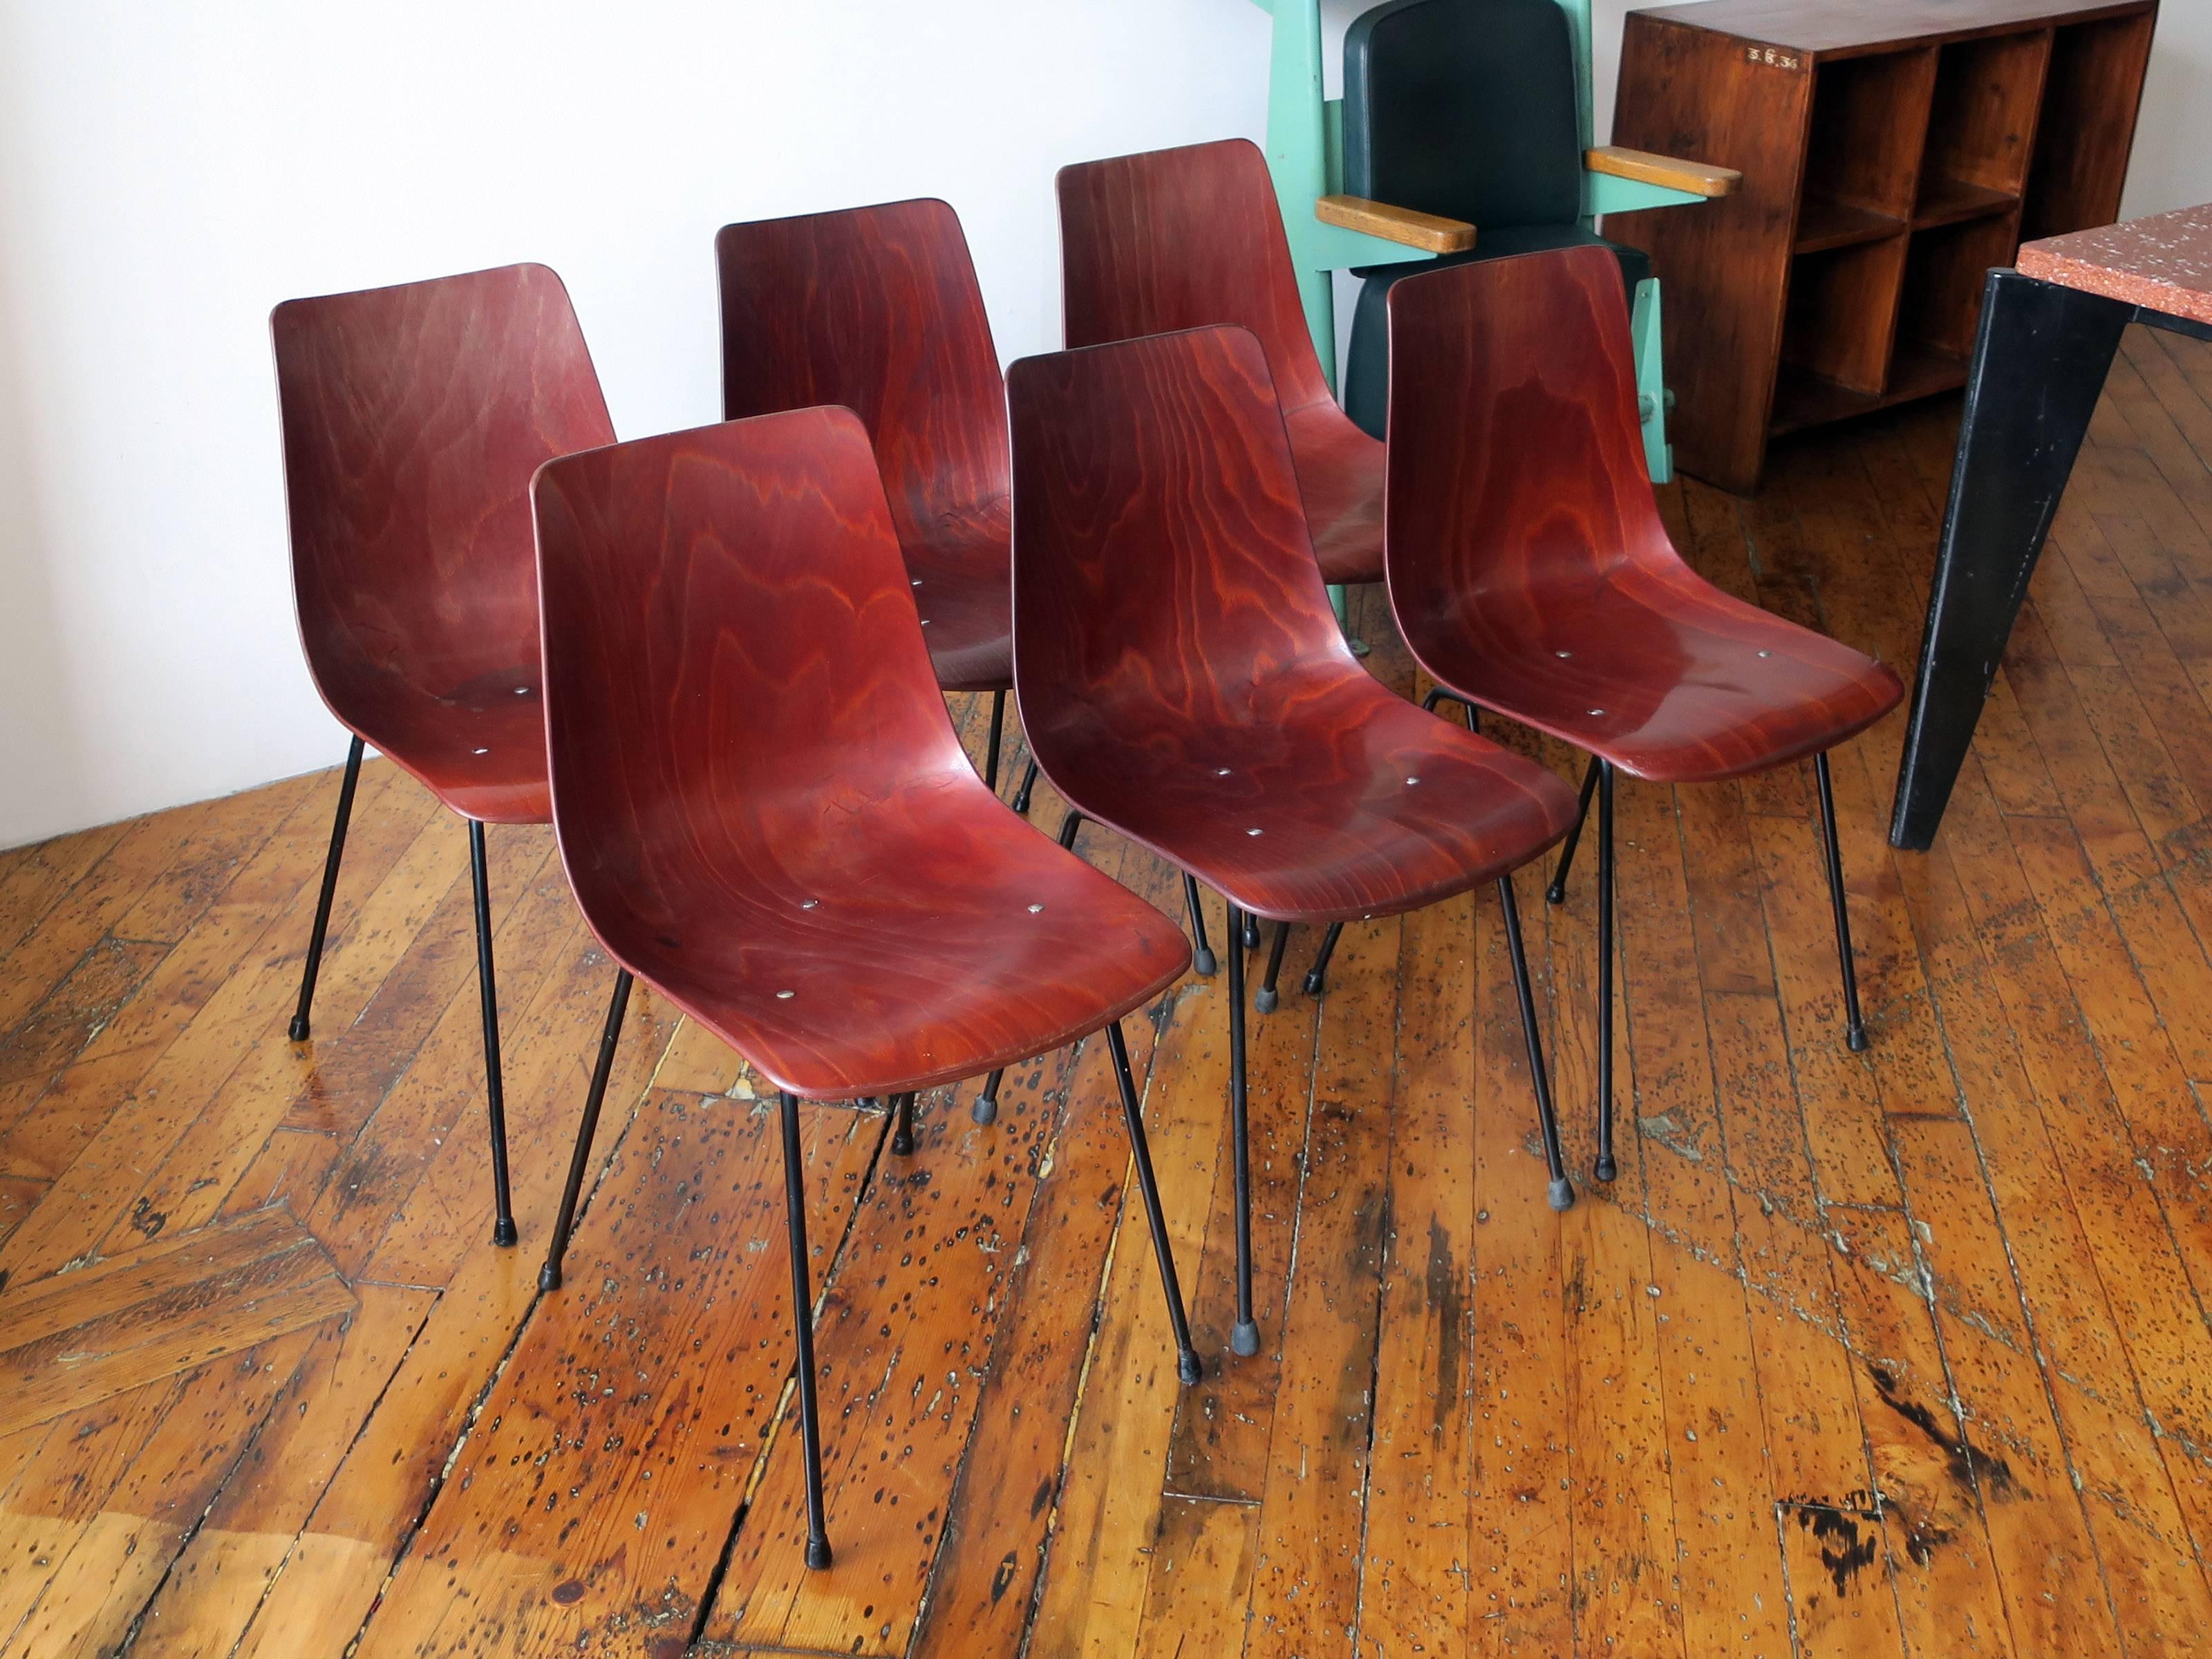 Set of six CM131 bakelized plywood dining chairs by Pierre Paulin for Thonet, manufactured by Thonet, circa 1954. This design rarely surfaces on the market. Excellent vintage condition.